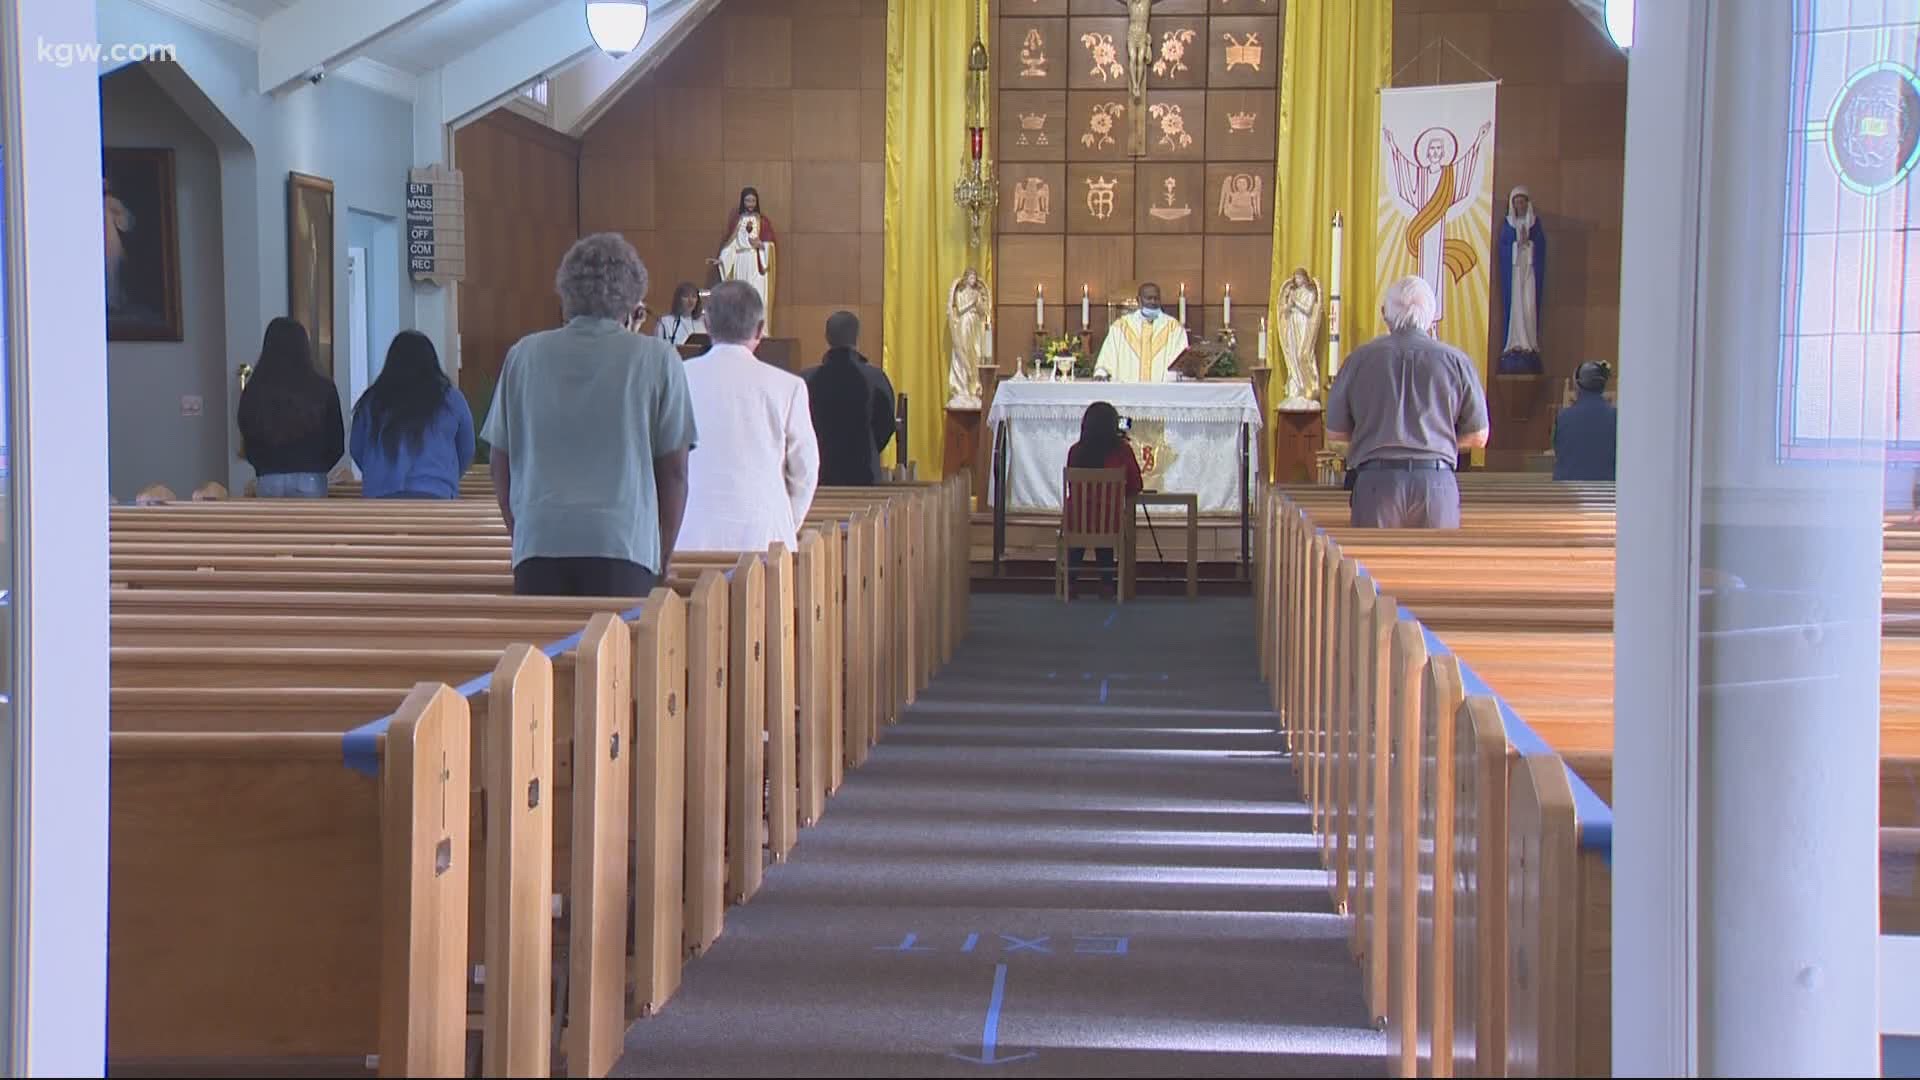 Most Catholic Churches opened their doors to parishioners for Masses for the first time in weeks today – but some chose to stay closed.